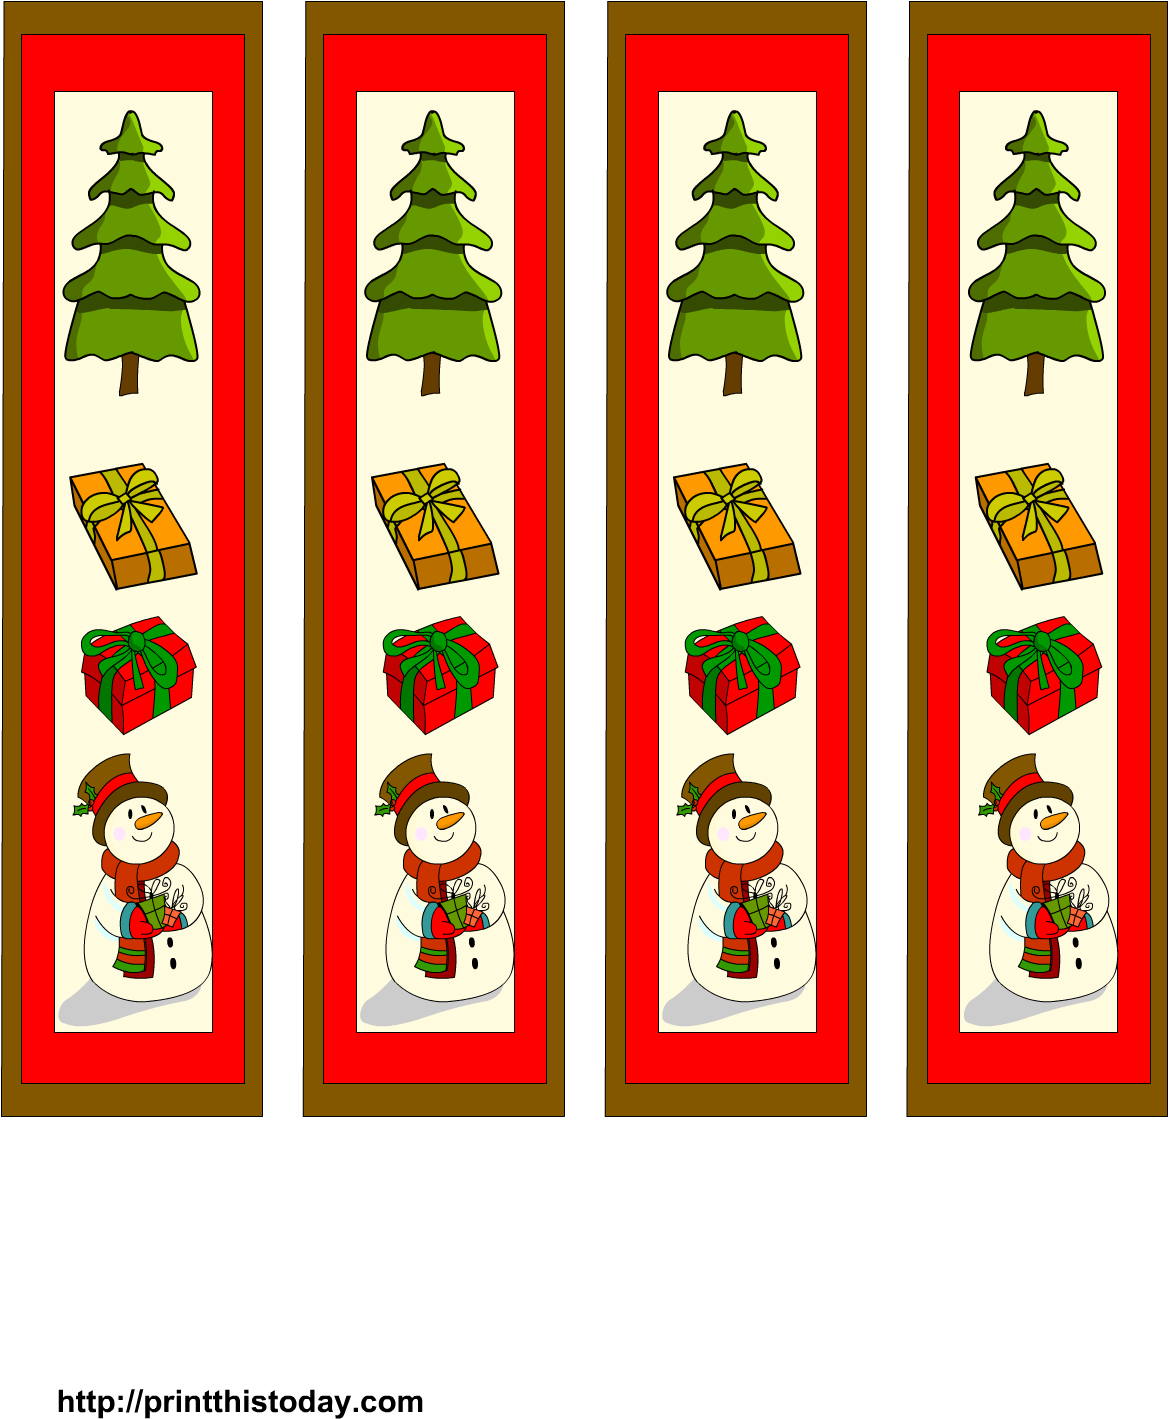 Snowman And Christmas Tree Bookmarks - Snowman And Christmas Tree Bookmarks (1275x1650)